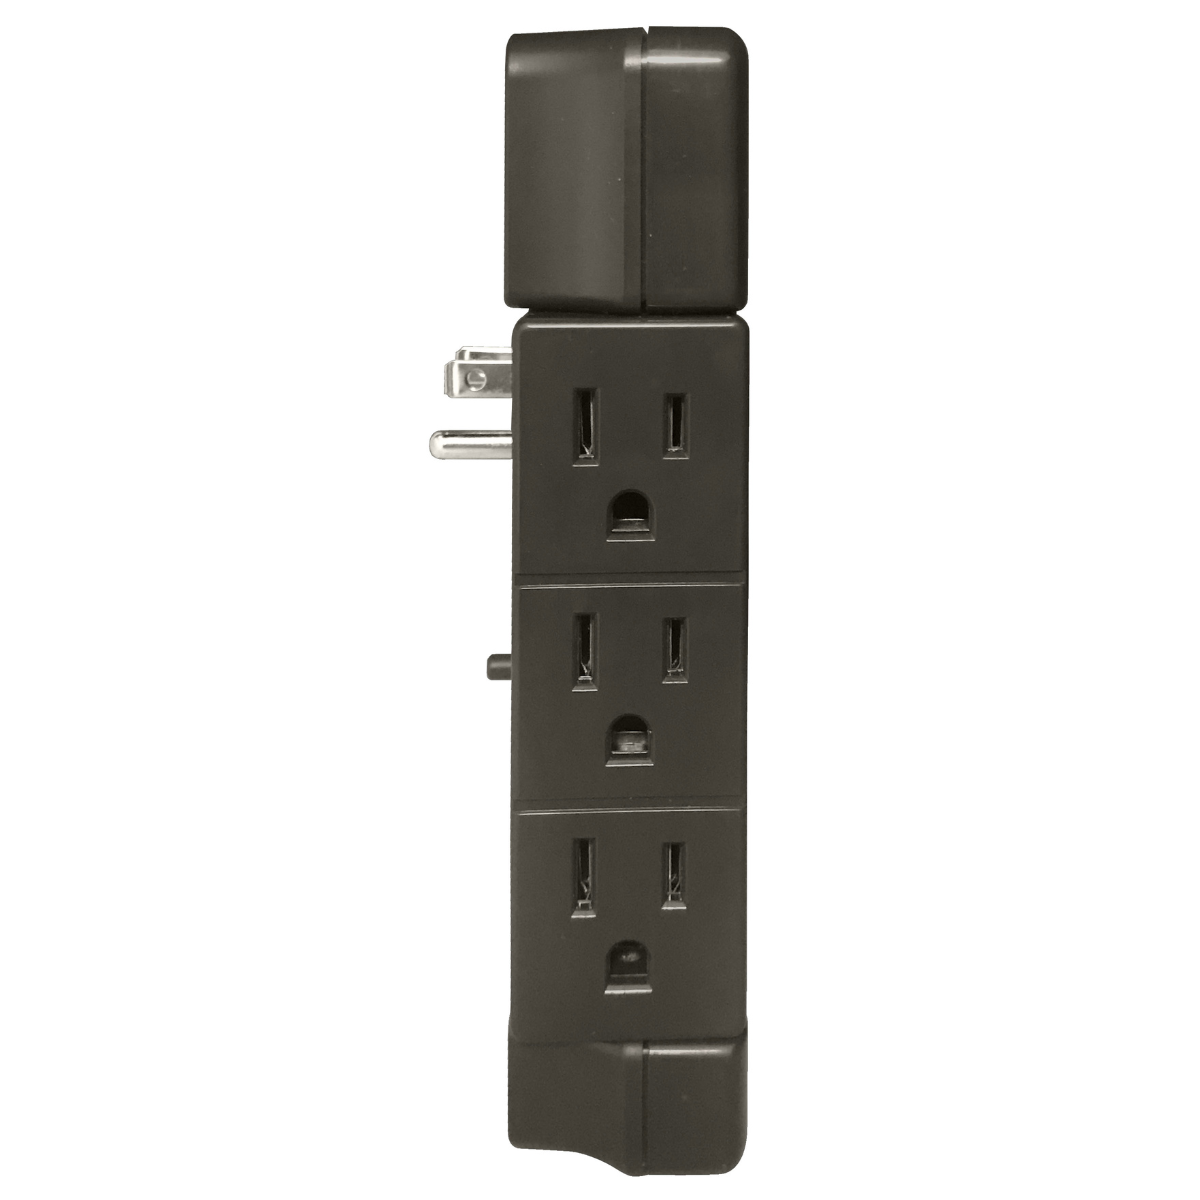 Surge Protector PV-2500 D